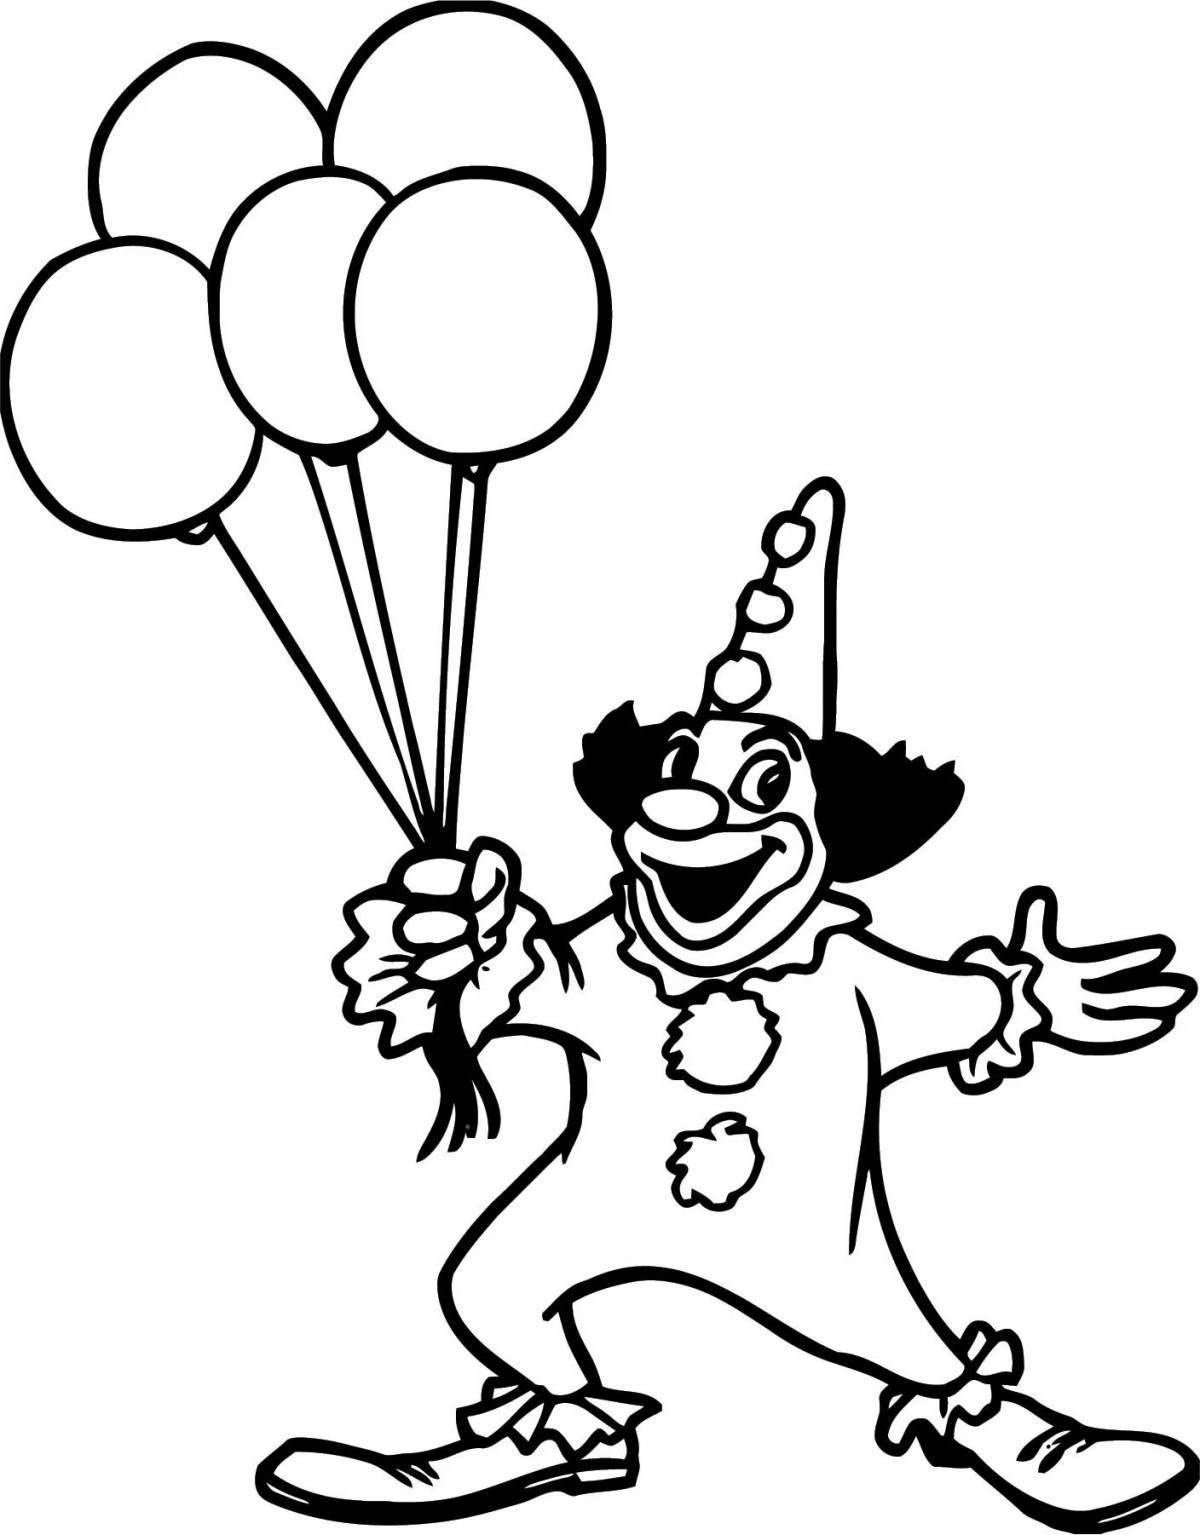 A jubilant clown with balloons